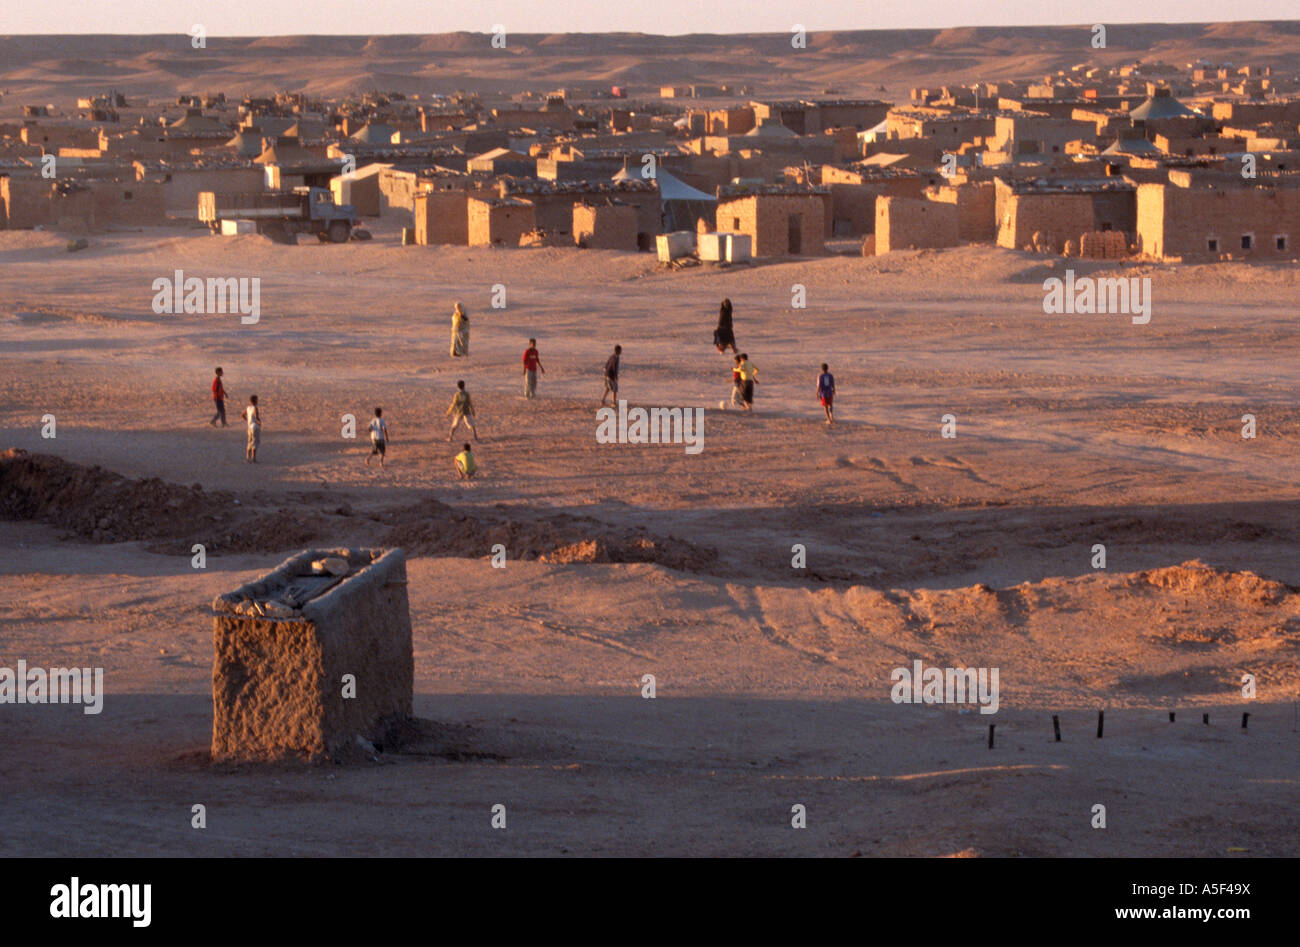 People enjoy their evening in Saharawi refugee camp in Tindouf Western Algeria Stock Photo